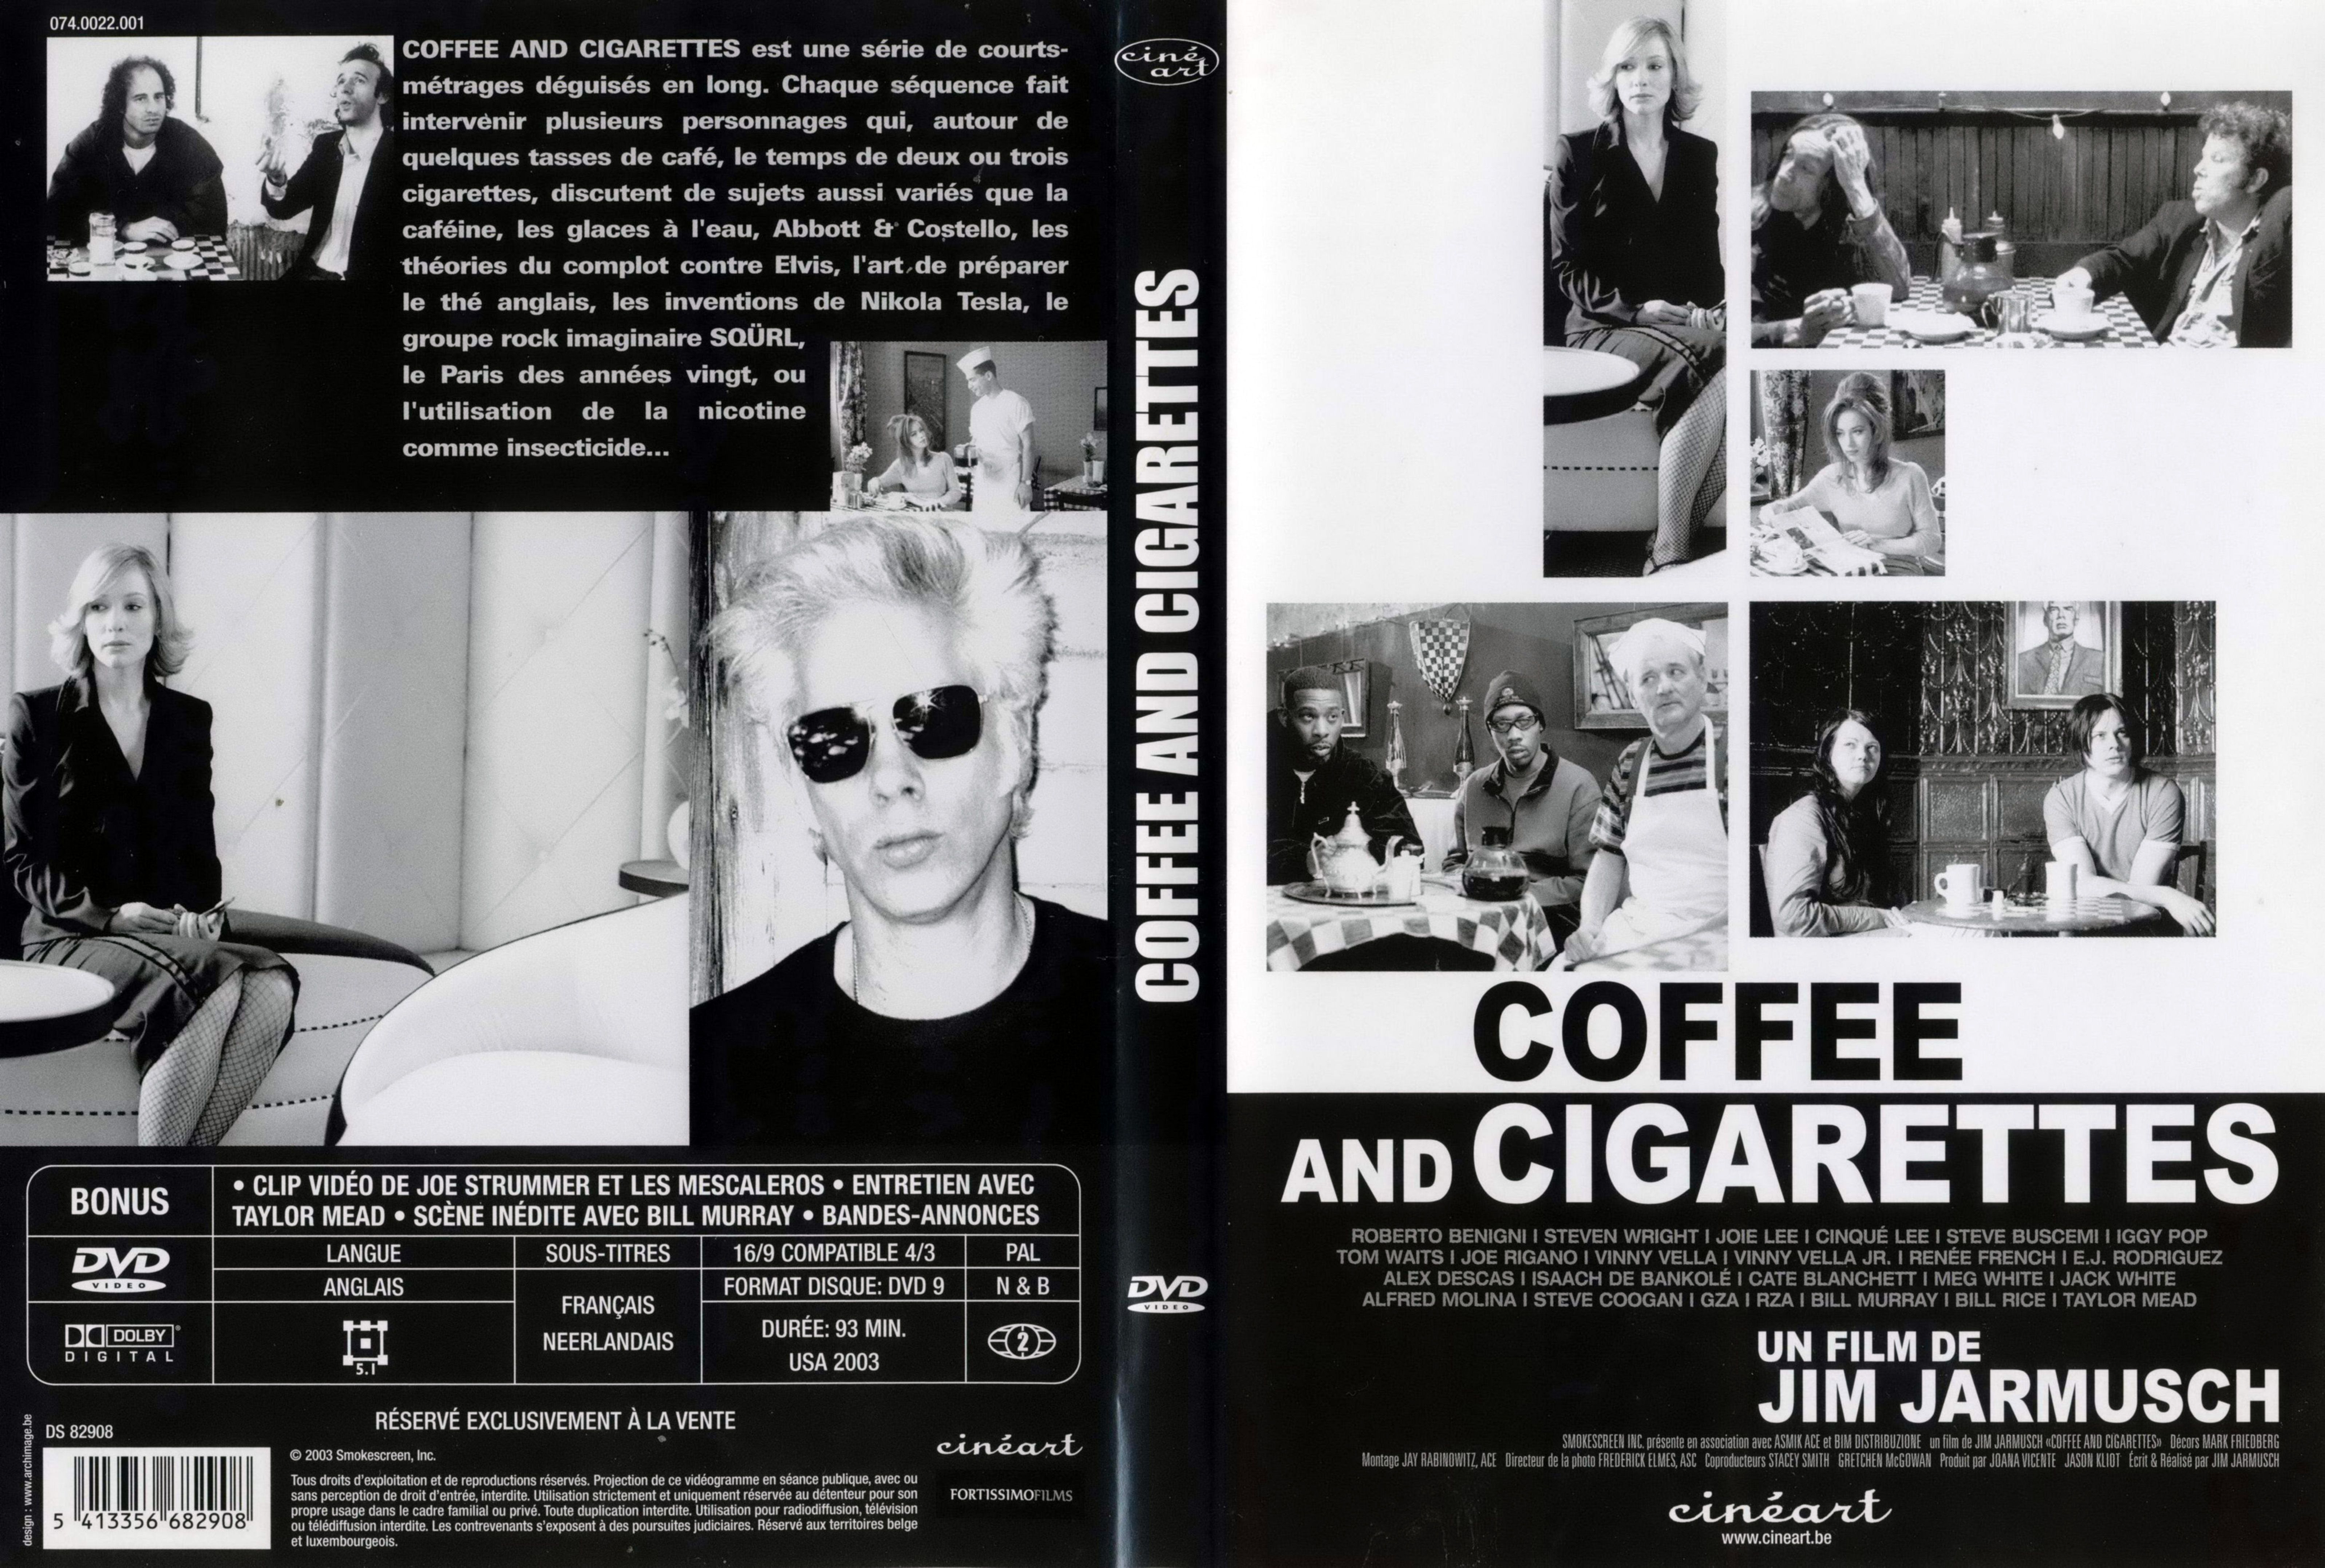 Jaquette DVD Coffee and cigarettes v2